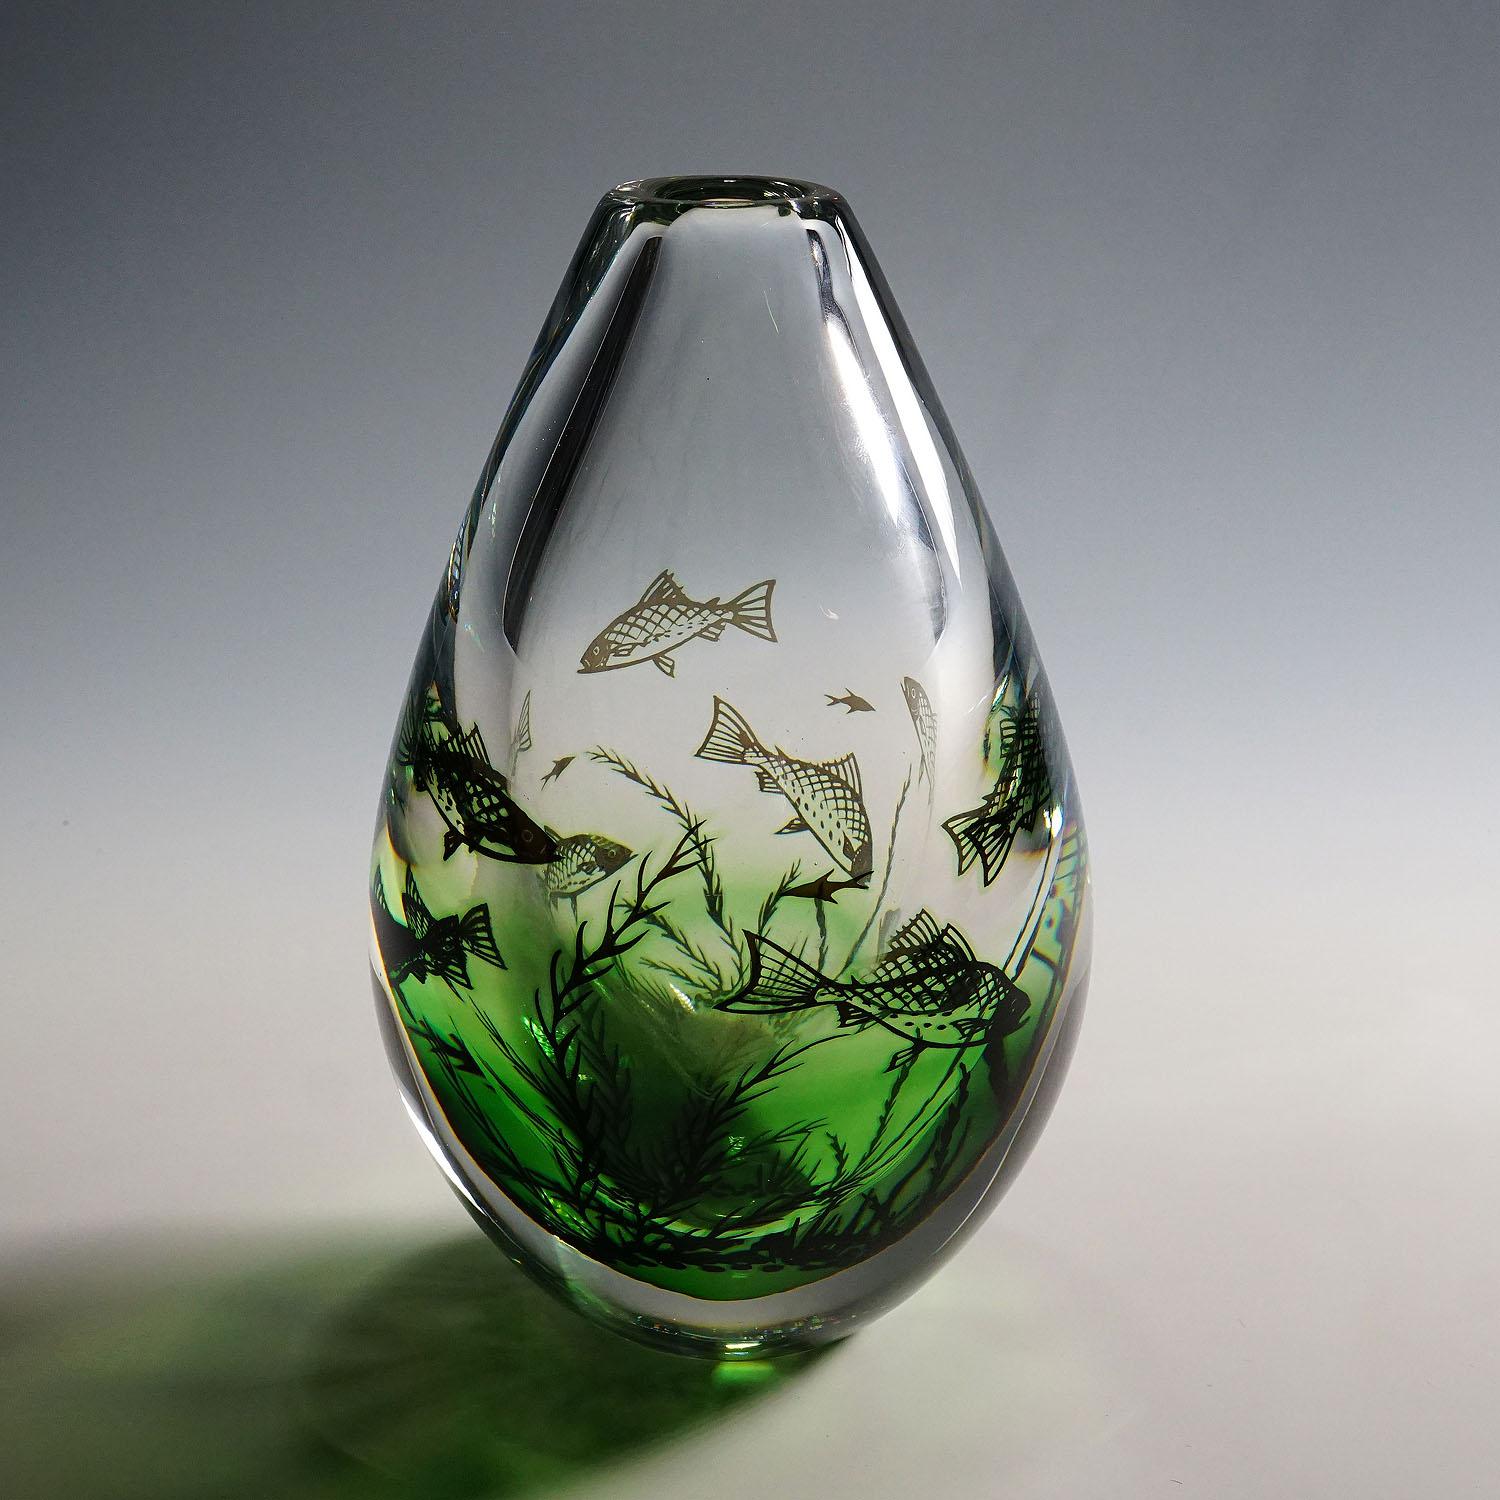 Fish Graal vase by Edward Hald for Orrefors, Sweden

A large and heavy vase of the Graal series designed by Edvward Hald for Orrefors Sweden in 1938. Clear and green glas decorated with underwater flora and fishes, overlayed with a thick clear glass